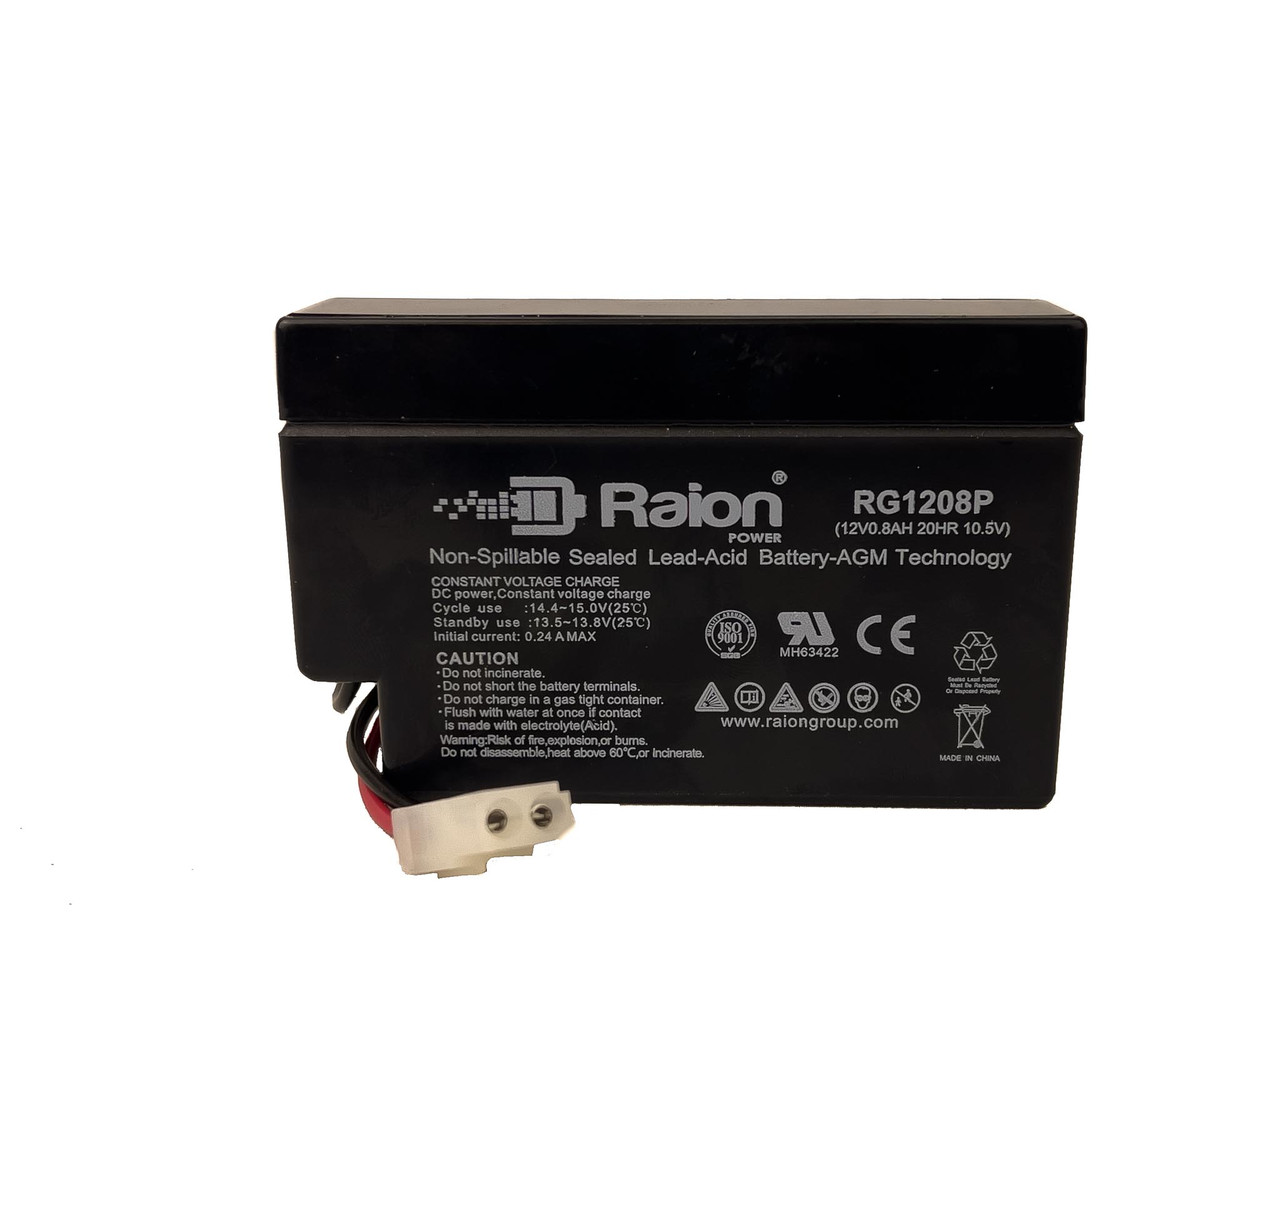 Raion Power 12V 0.8Ah SLA Battery With T1 Terminals For Mule PM1208